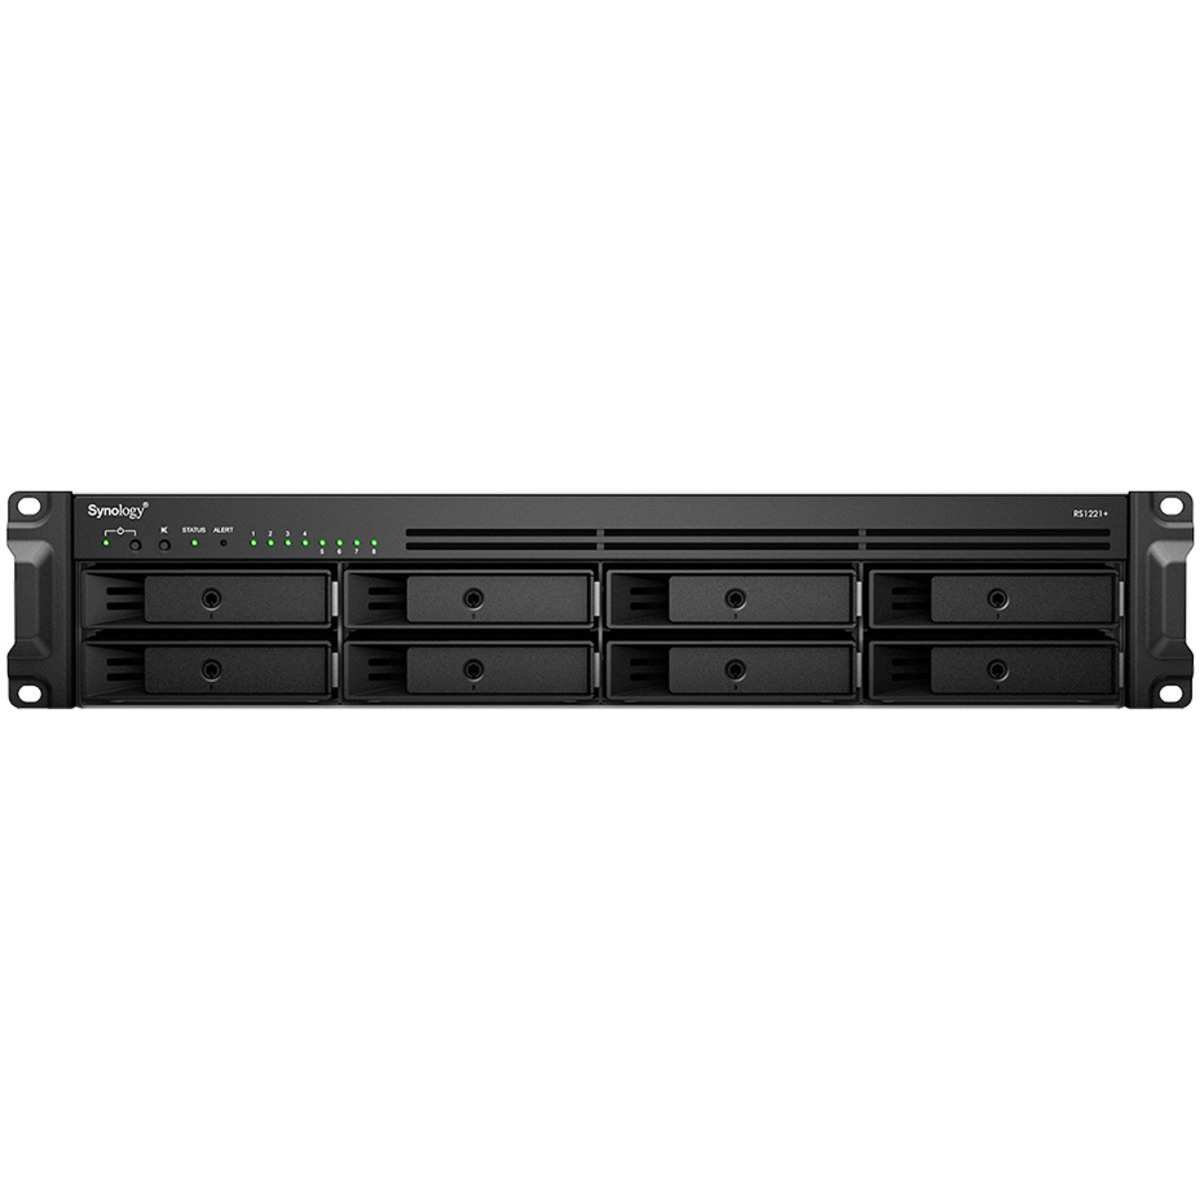 buy $4188 Synology RackStation RS1221+ 128tb RackMount NAS - Network Attached Storage Device 8x16000gb Toshiba Enterprise Capacity MG08ACA16TE 3.5 7200rpm SATA 6Gb/s HDD ENTERPRISE Class Drives Installed - Burn-In Tested - nas headquarters buy network attached storage server device das new raid-5 free shipping usa RackStation RS1221+